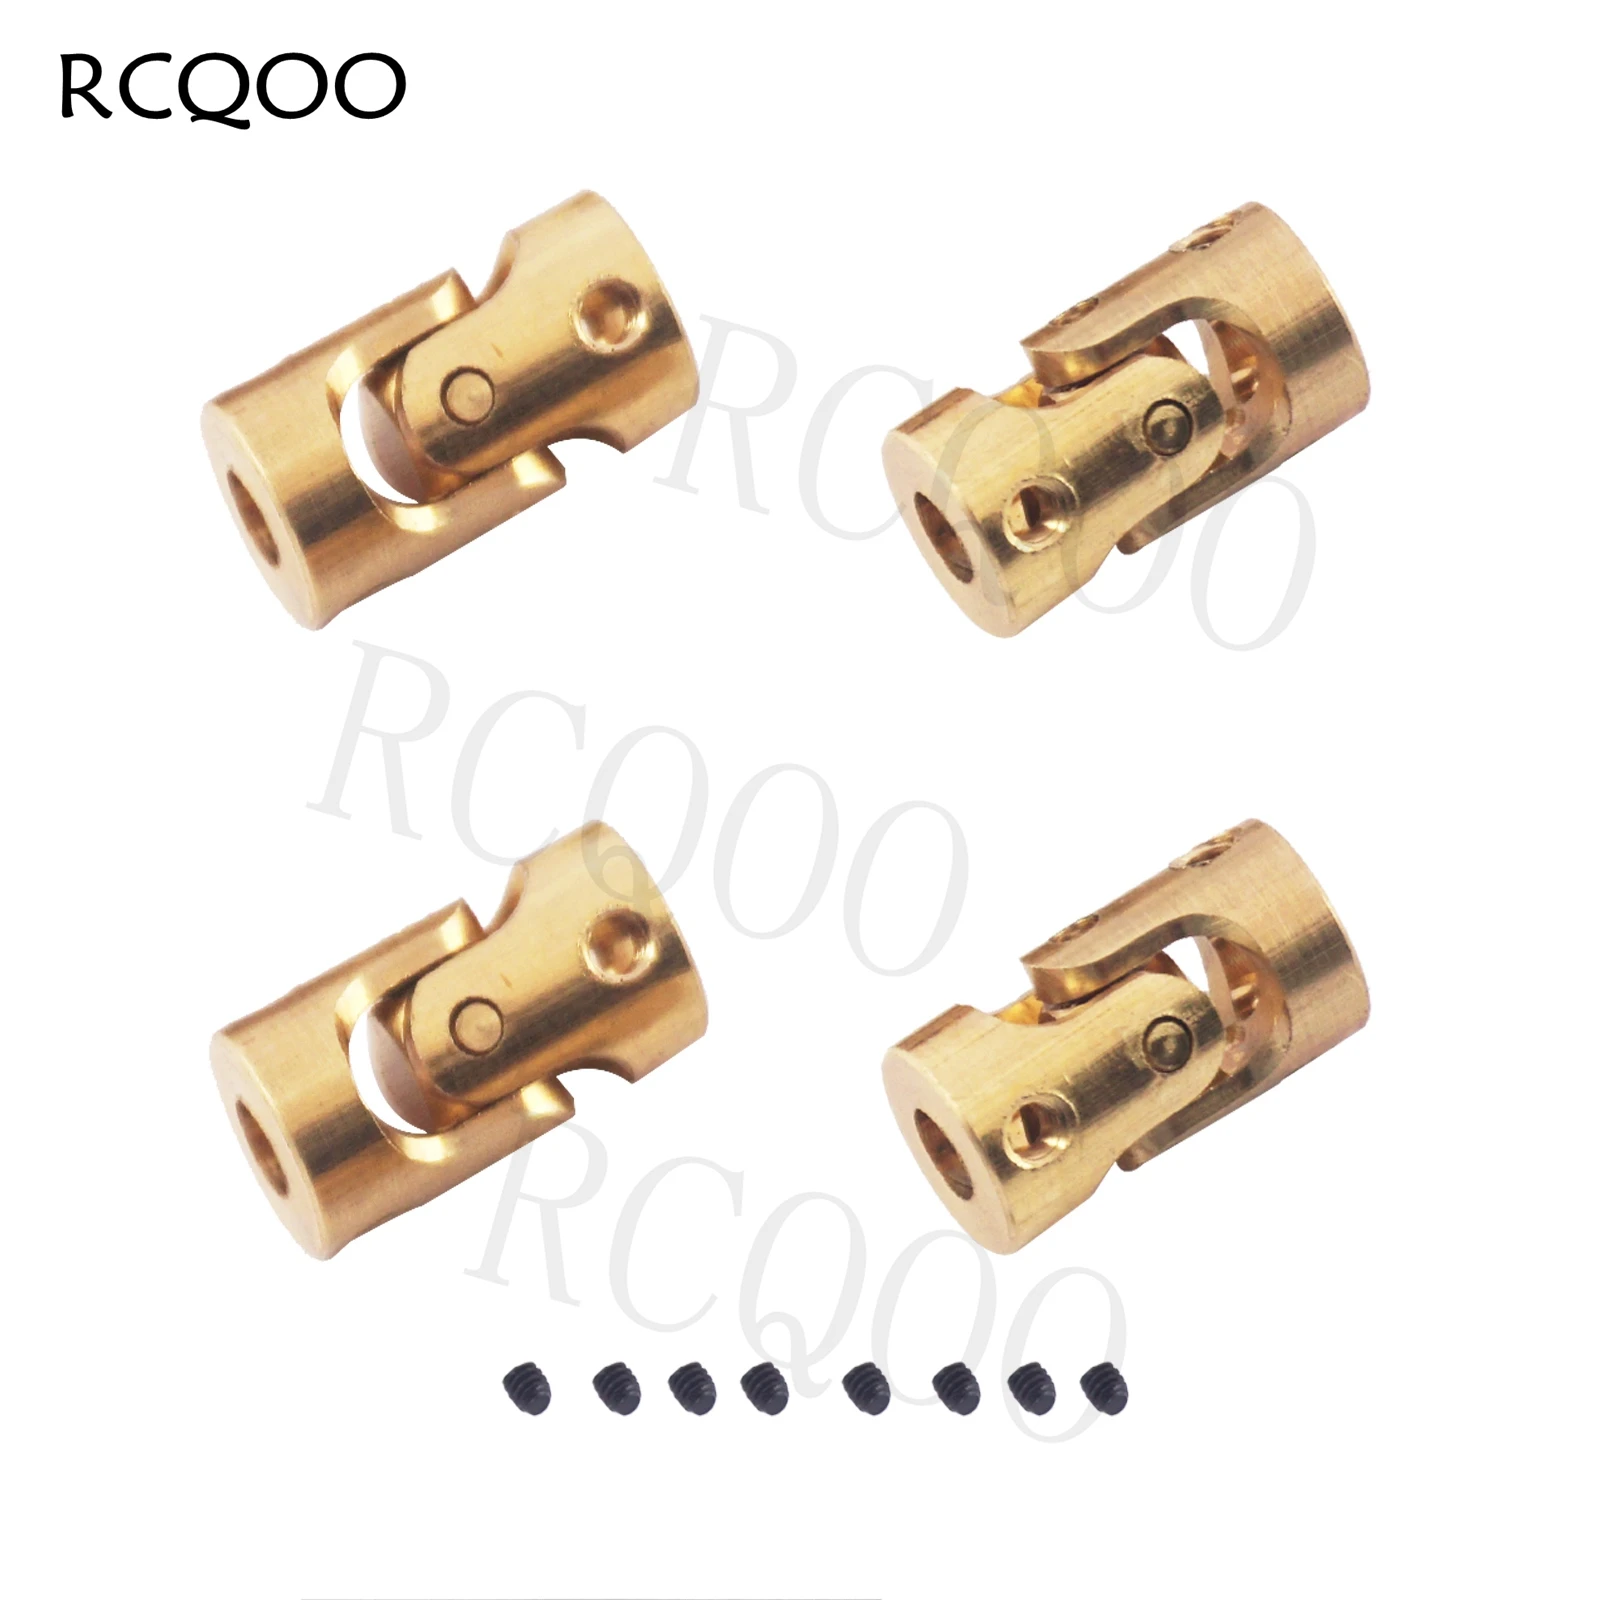 

4Pack 3mm-3mm Micro Brass Universal Joint Motor Shaft Coupler for 1/24 1/18 RC Car Boat DIY Airplane Gimbal